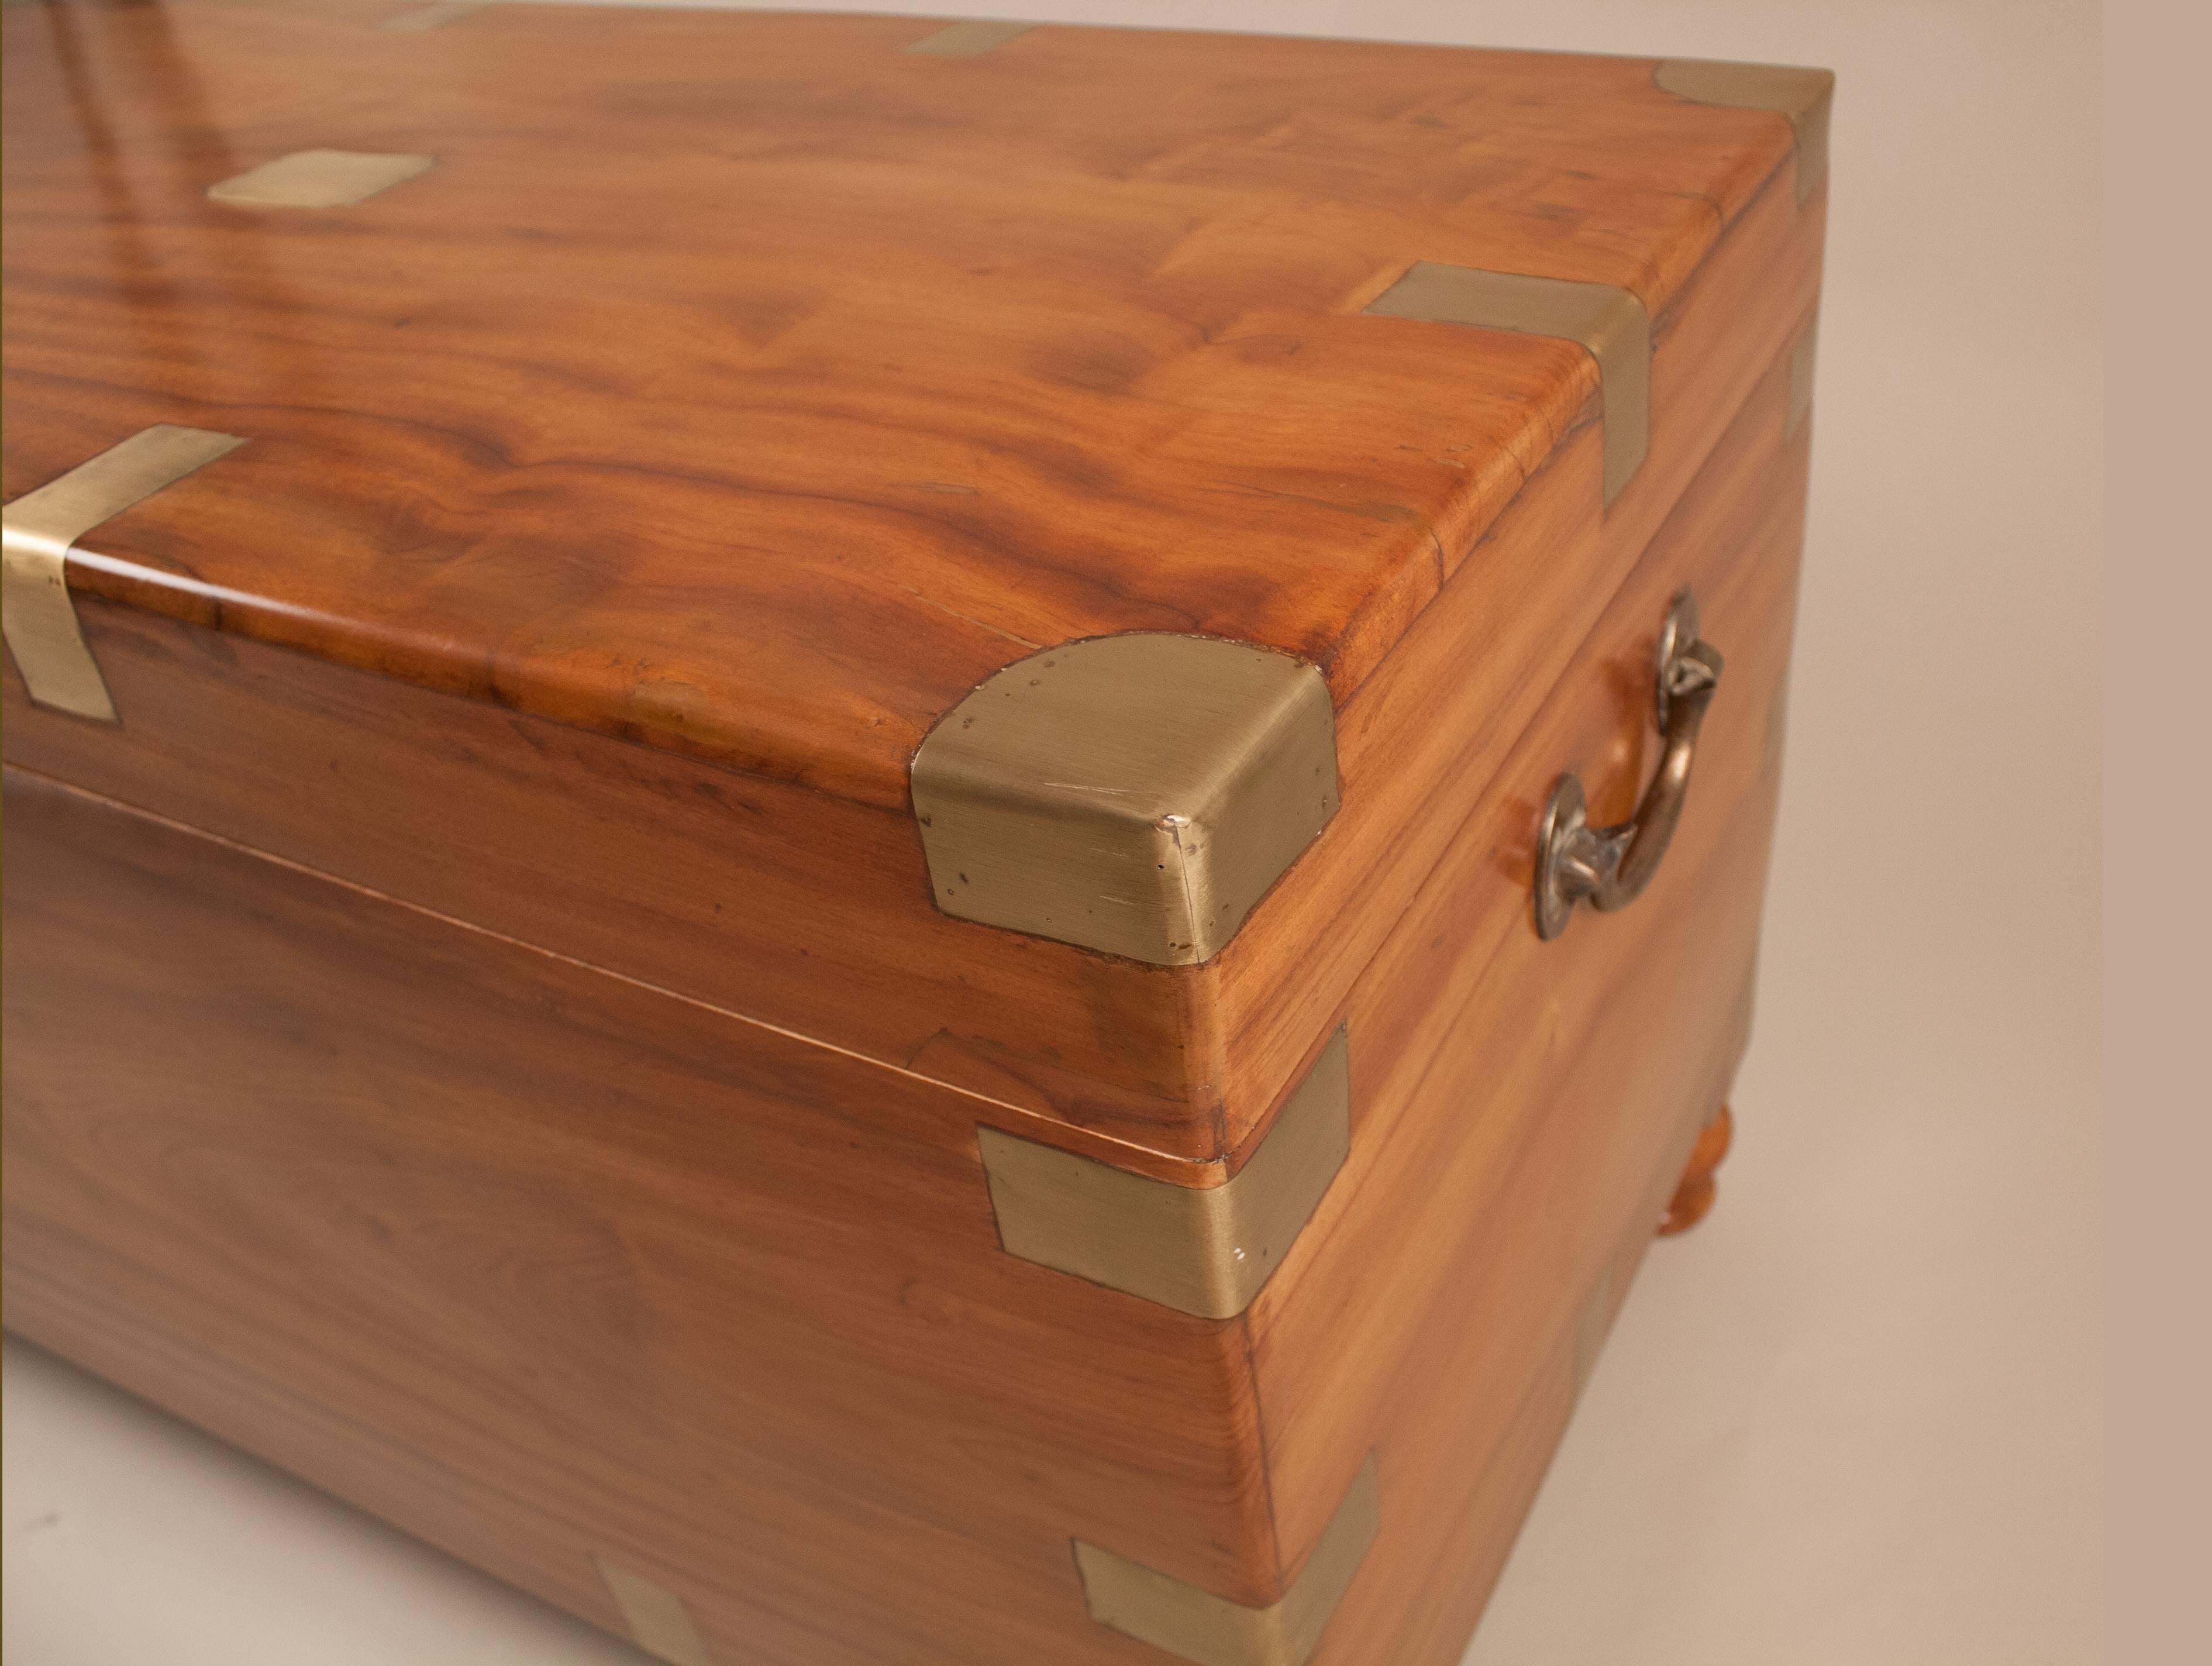 An especially large and handsome late 19th century brass-bound camphor wood captain's chest from England with brass carry handles, side straps and corner details, and an old working lock and key. The trunk has a hinged lid that is supported by